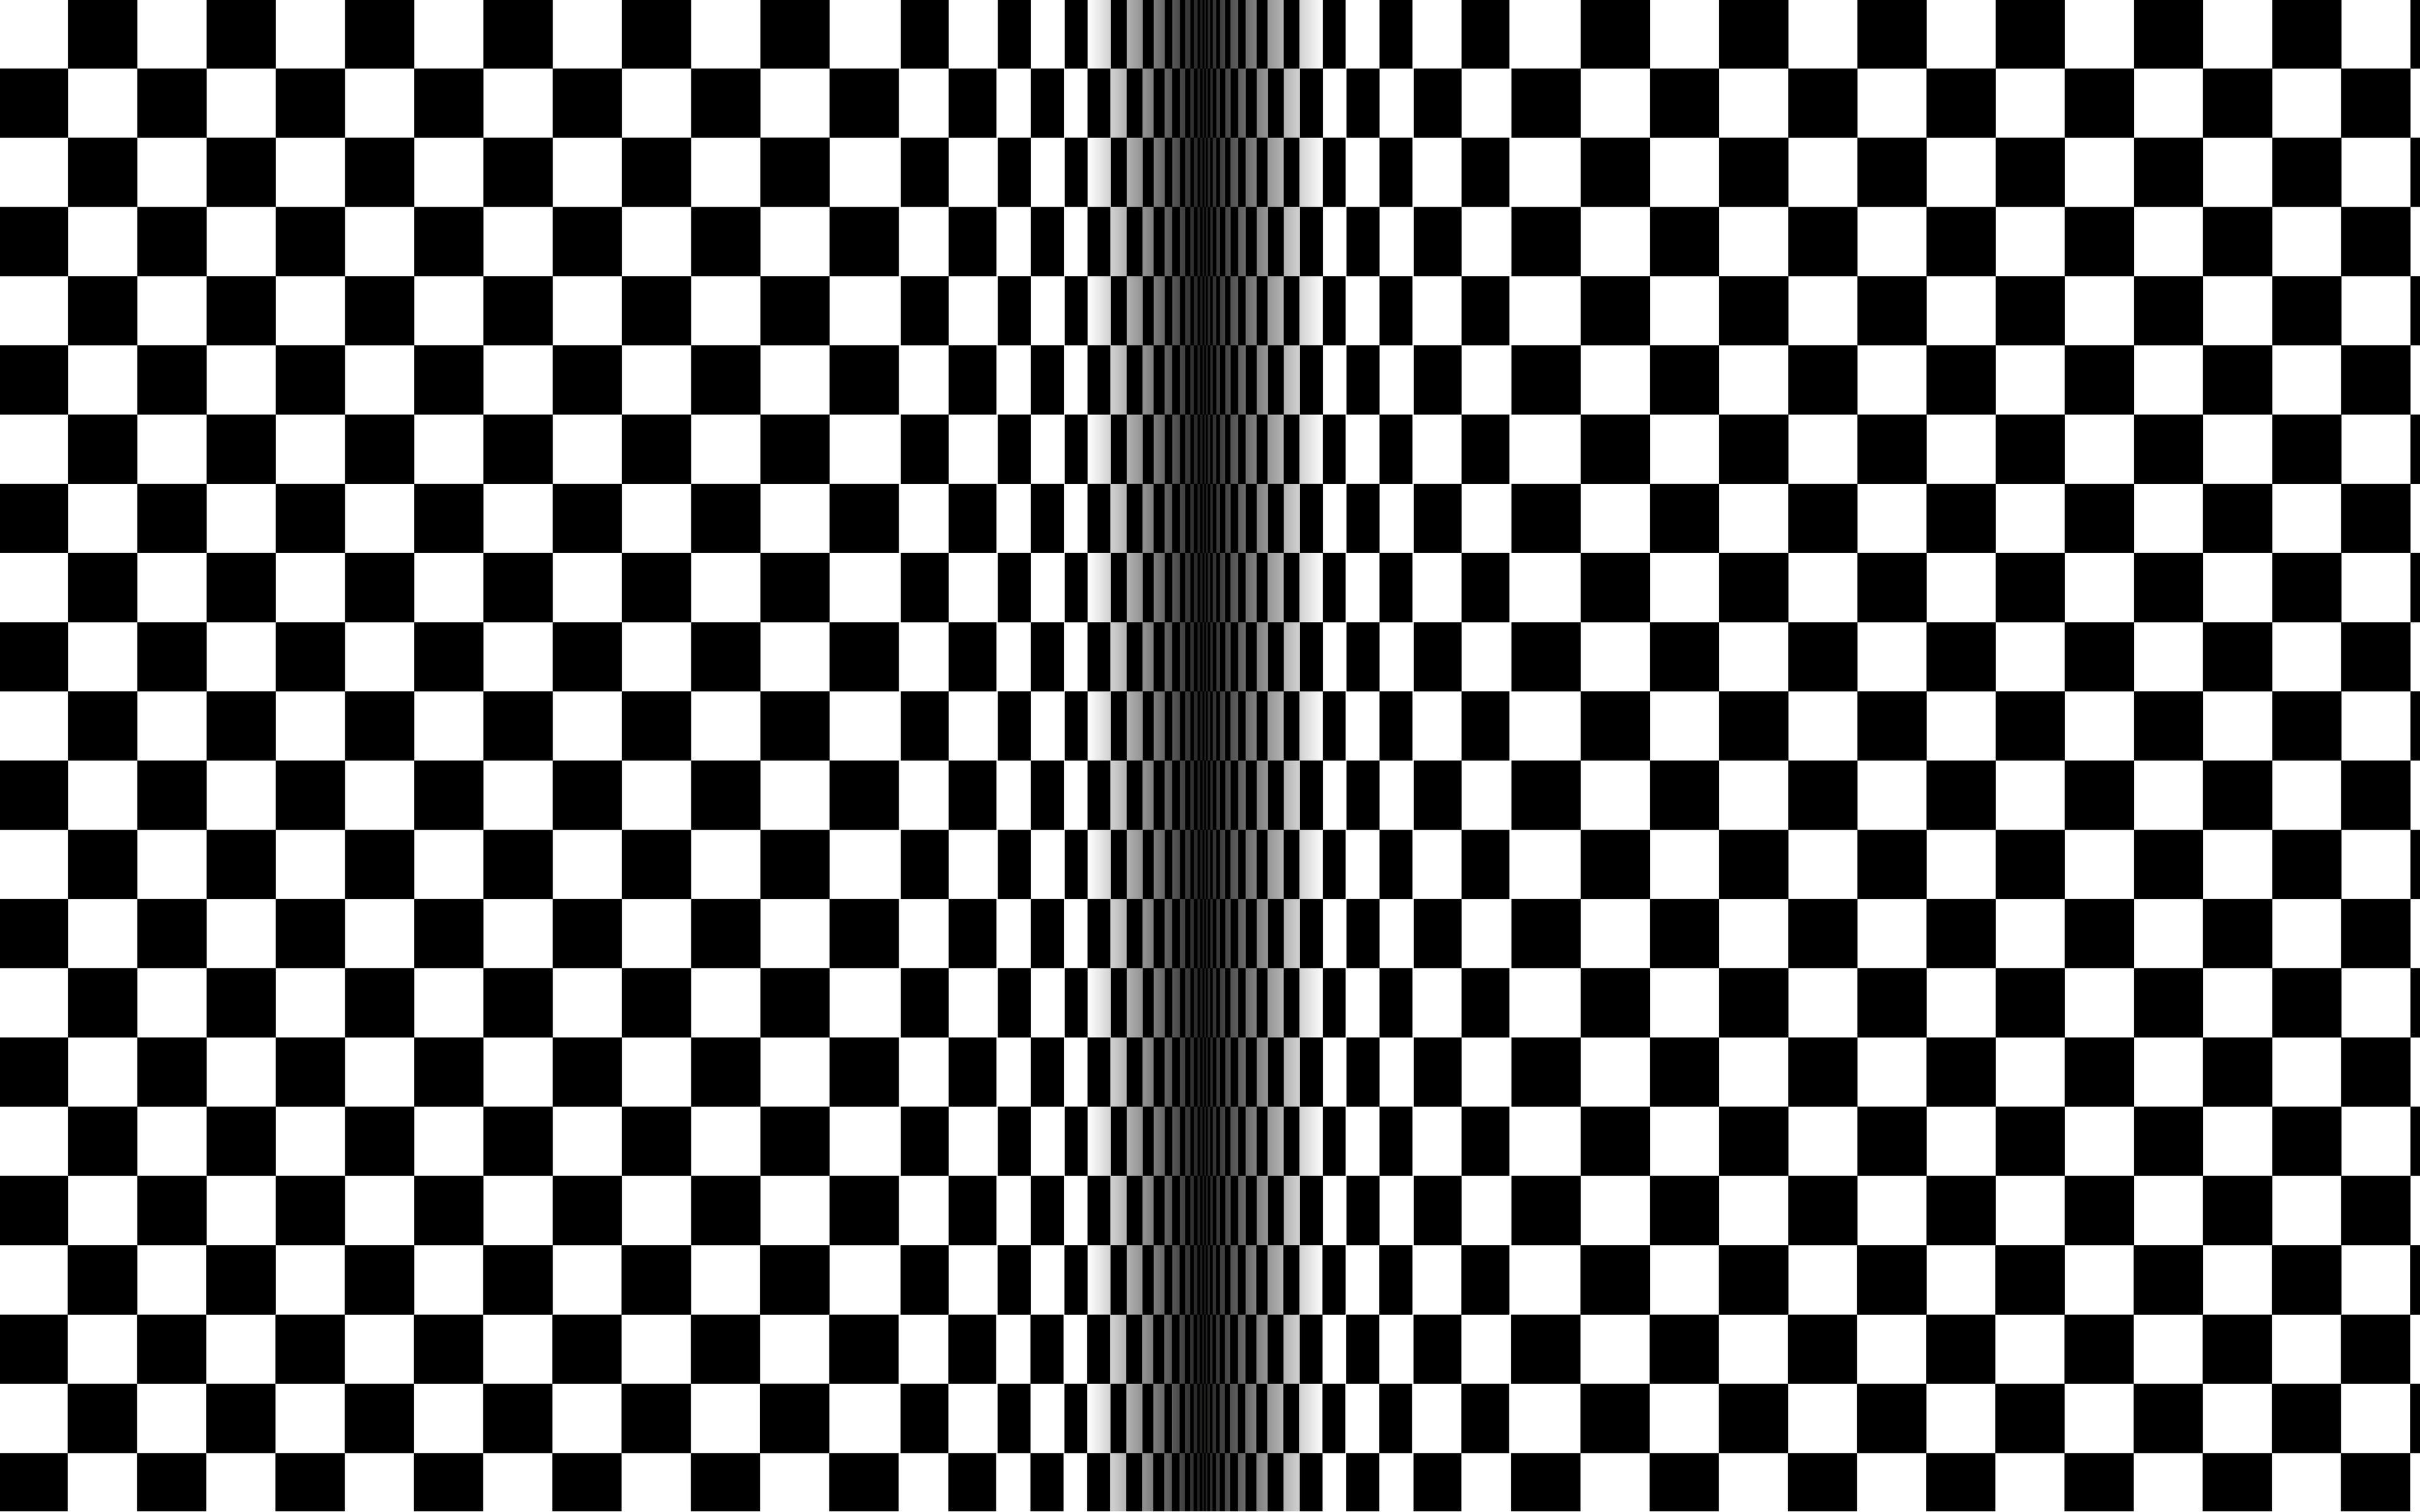 Download wallpaper 3840x2400 optical illusion, illusion, bw, lines, cubes, movement 4k ultra HD 16:10 HD background